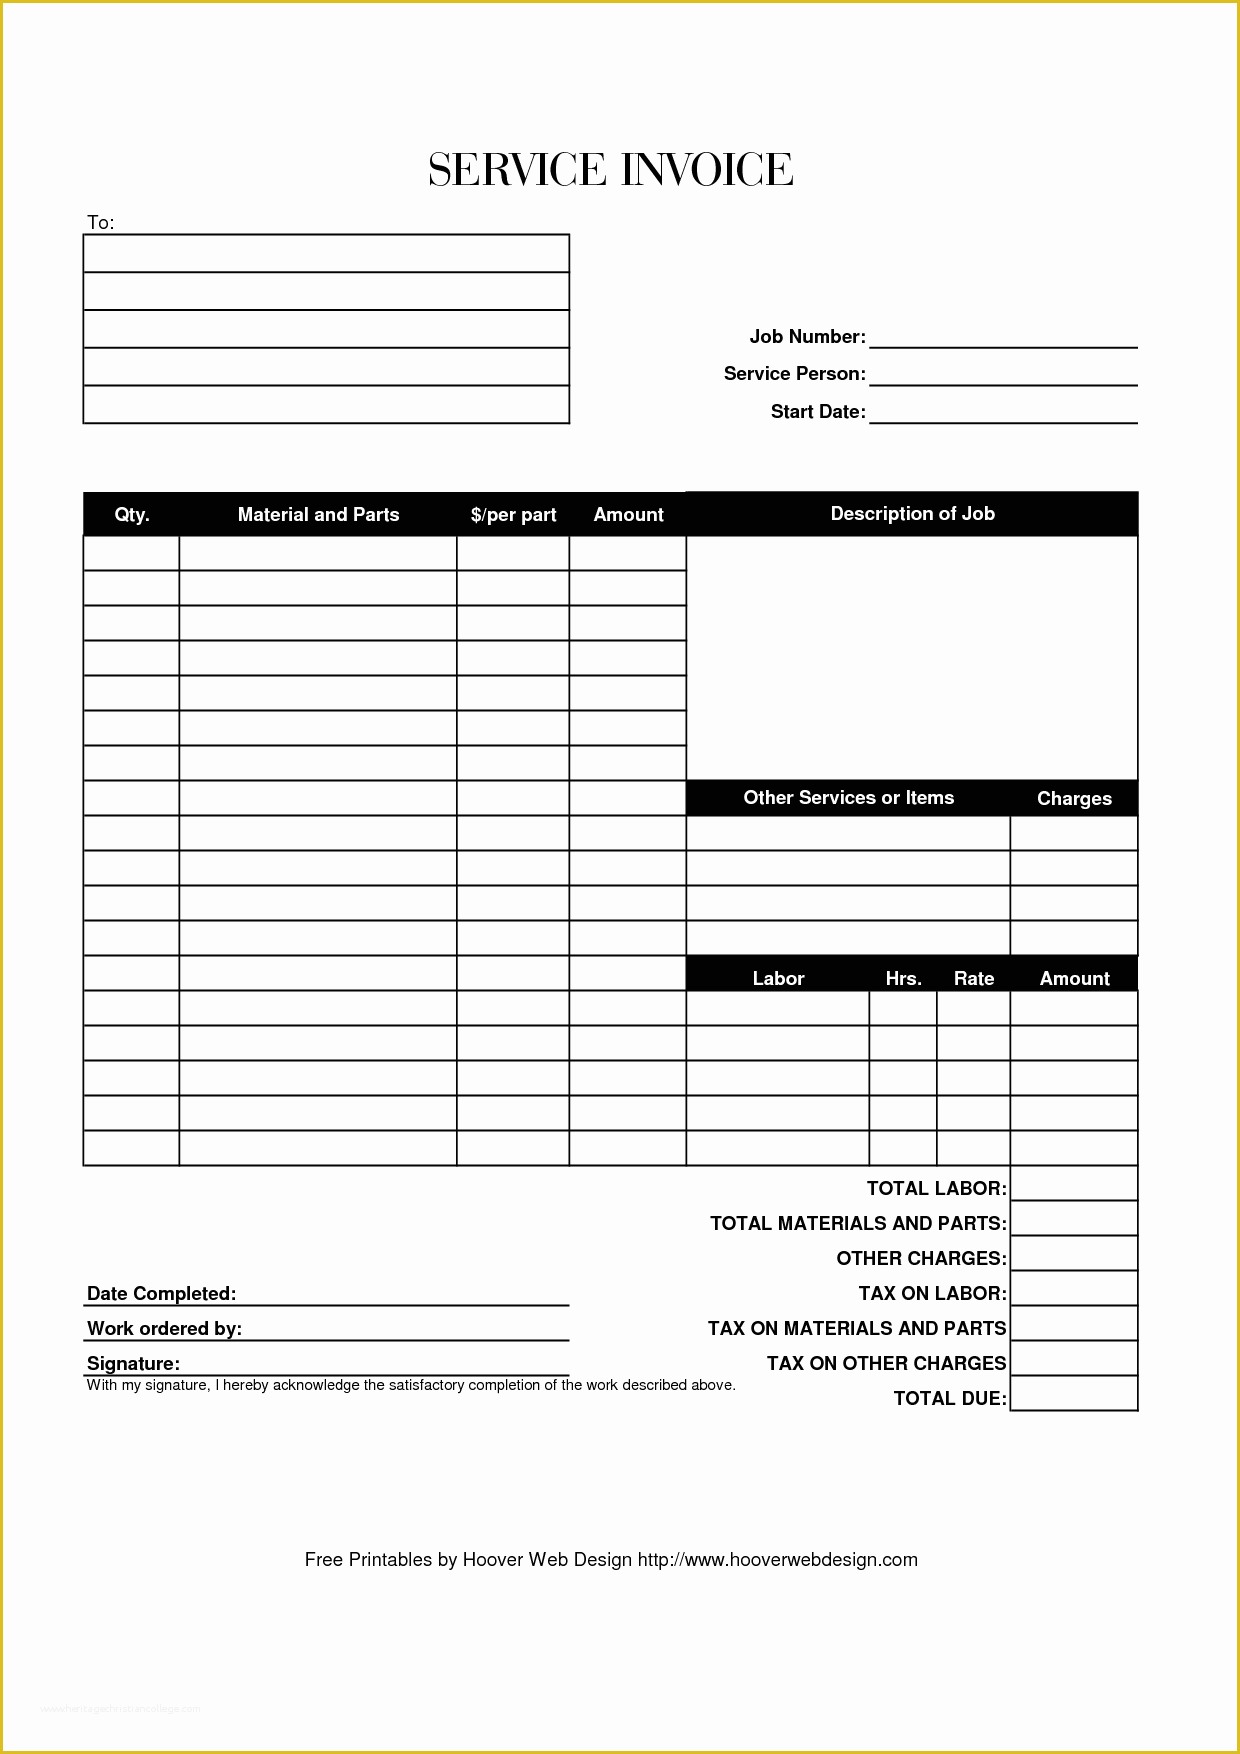 Free Printable Invoice Templates Of Hoover Receipts